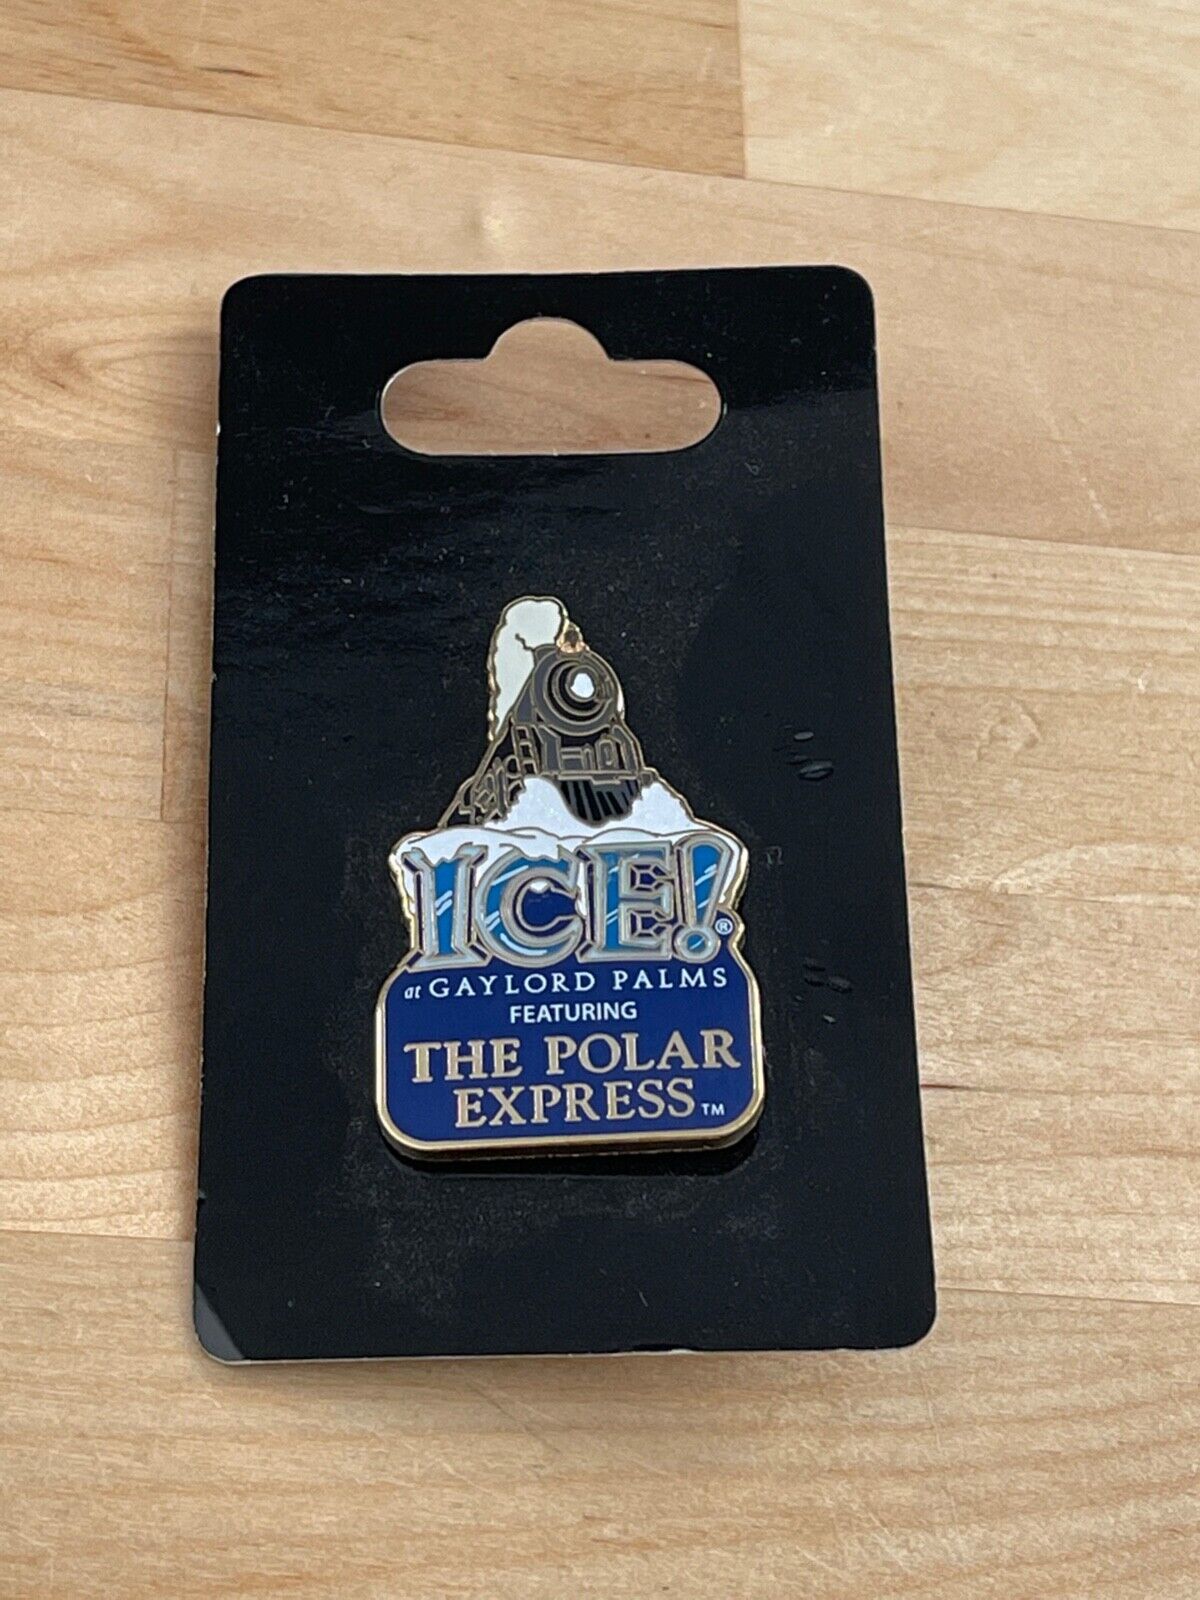 The Polar Express Exclusive Pin From Ice At Gaylord Palms / NEW